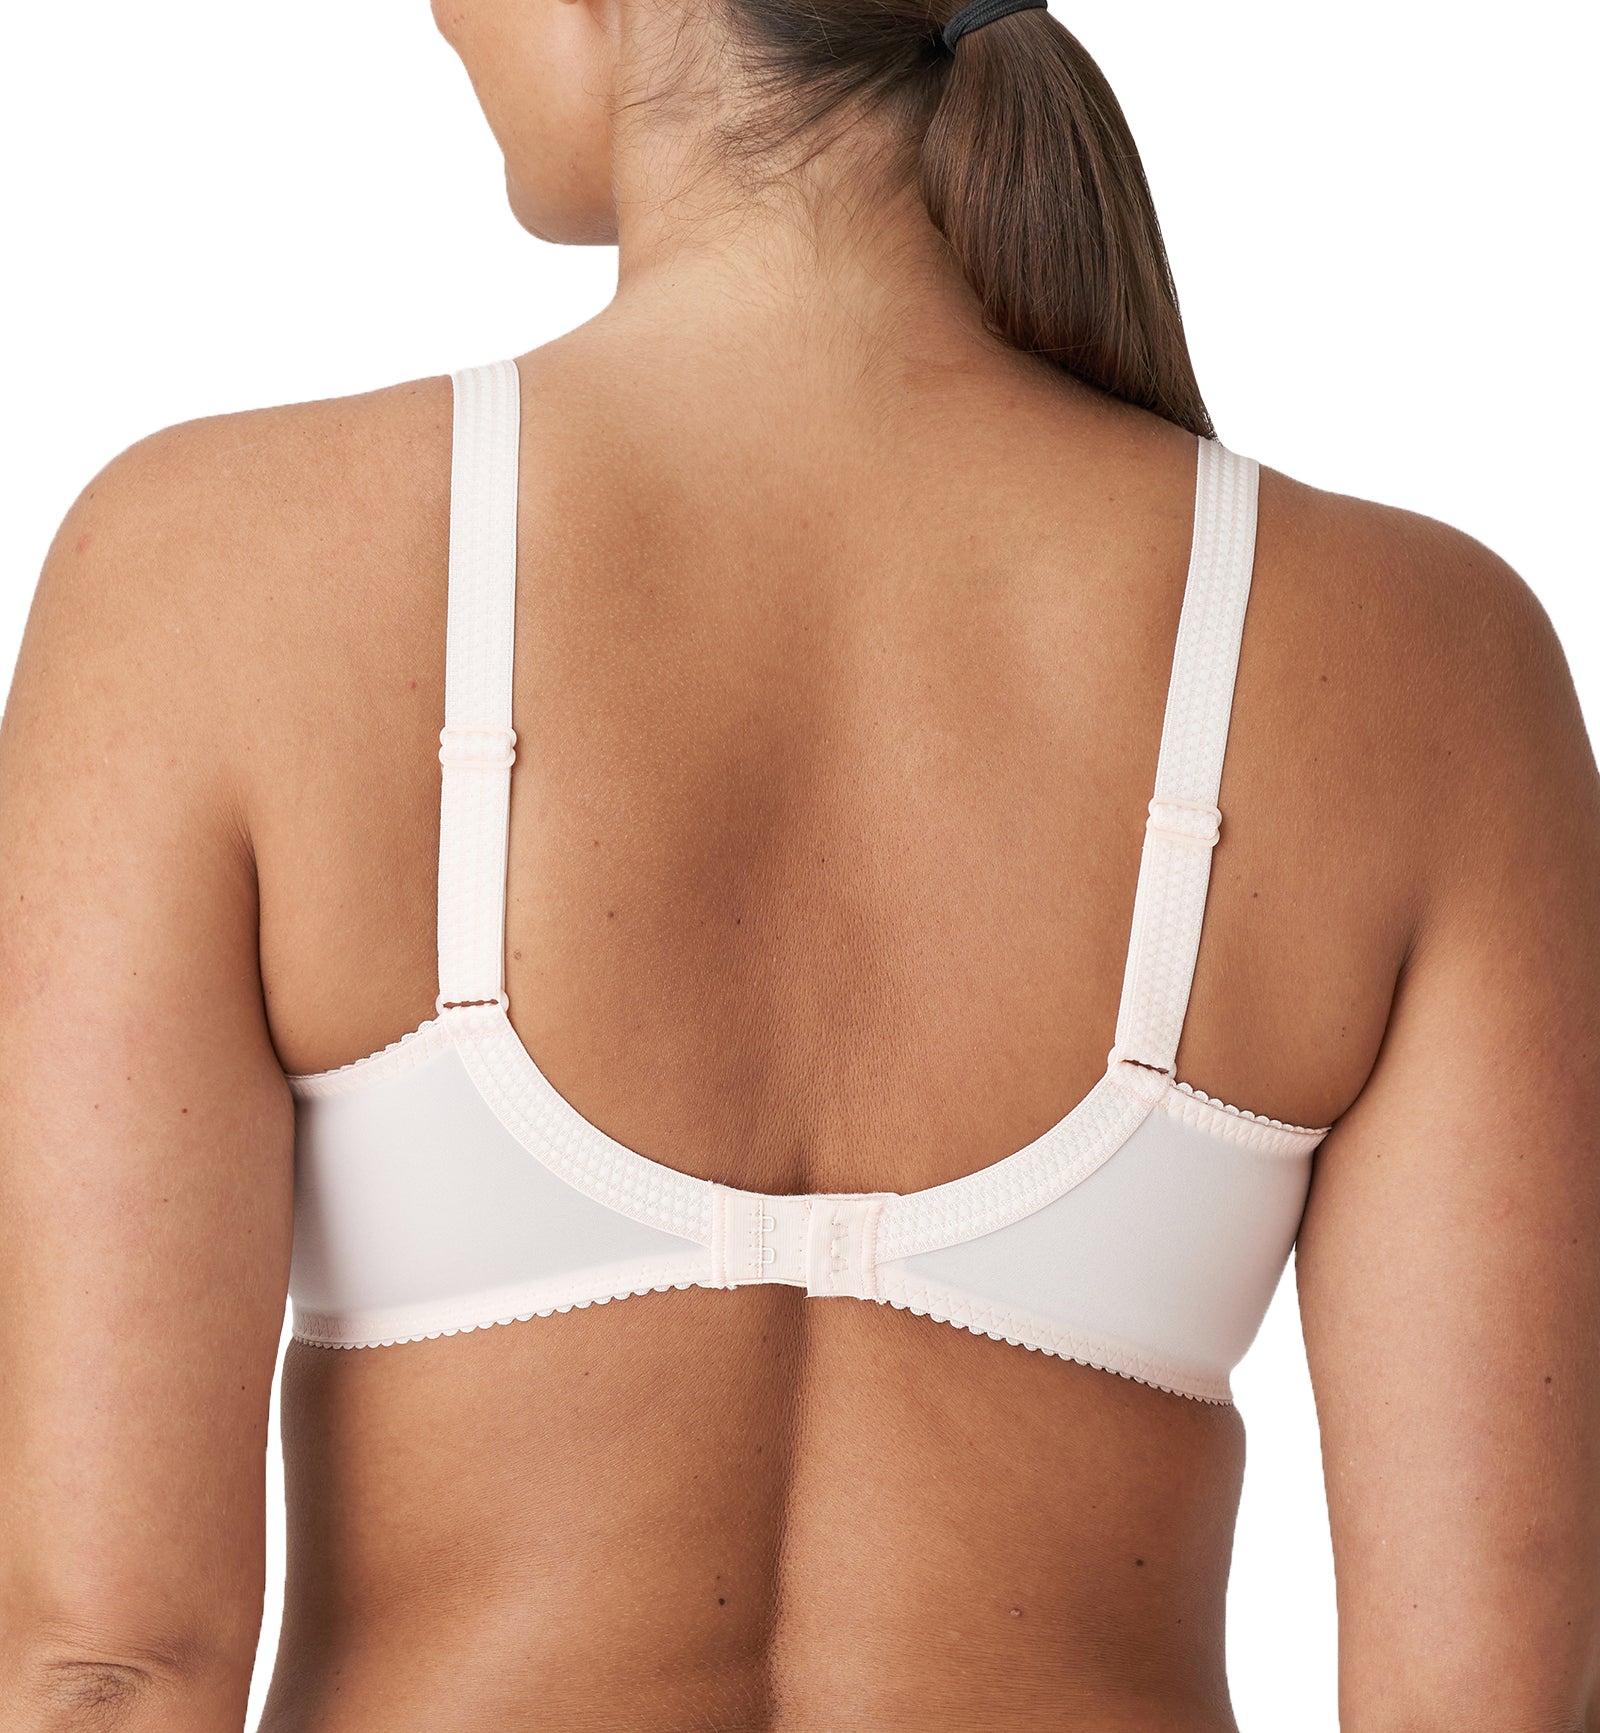 Leonisa Firm Compression Shaper with Boyshort Butt Lifter (018491)- Be -  Breakout Bras